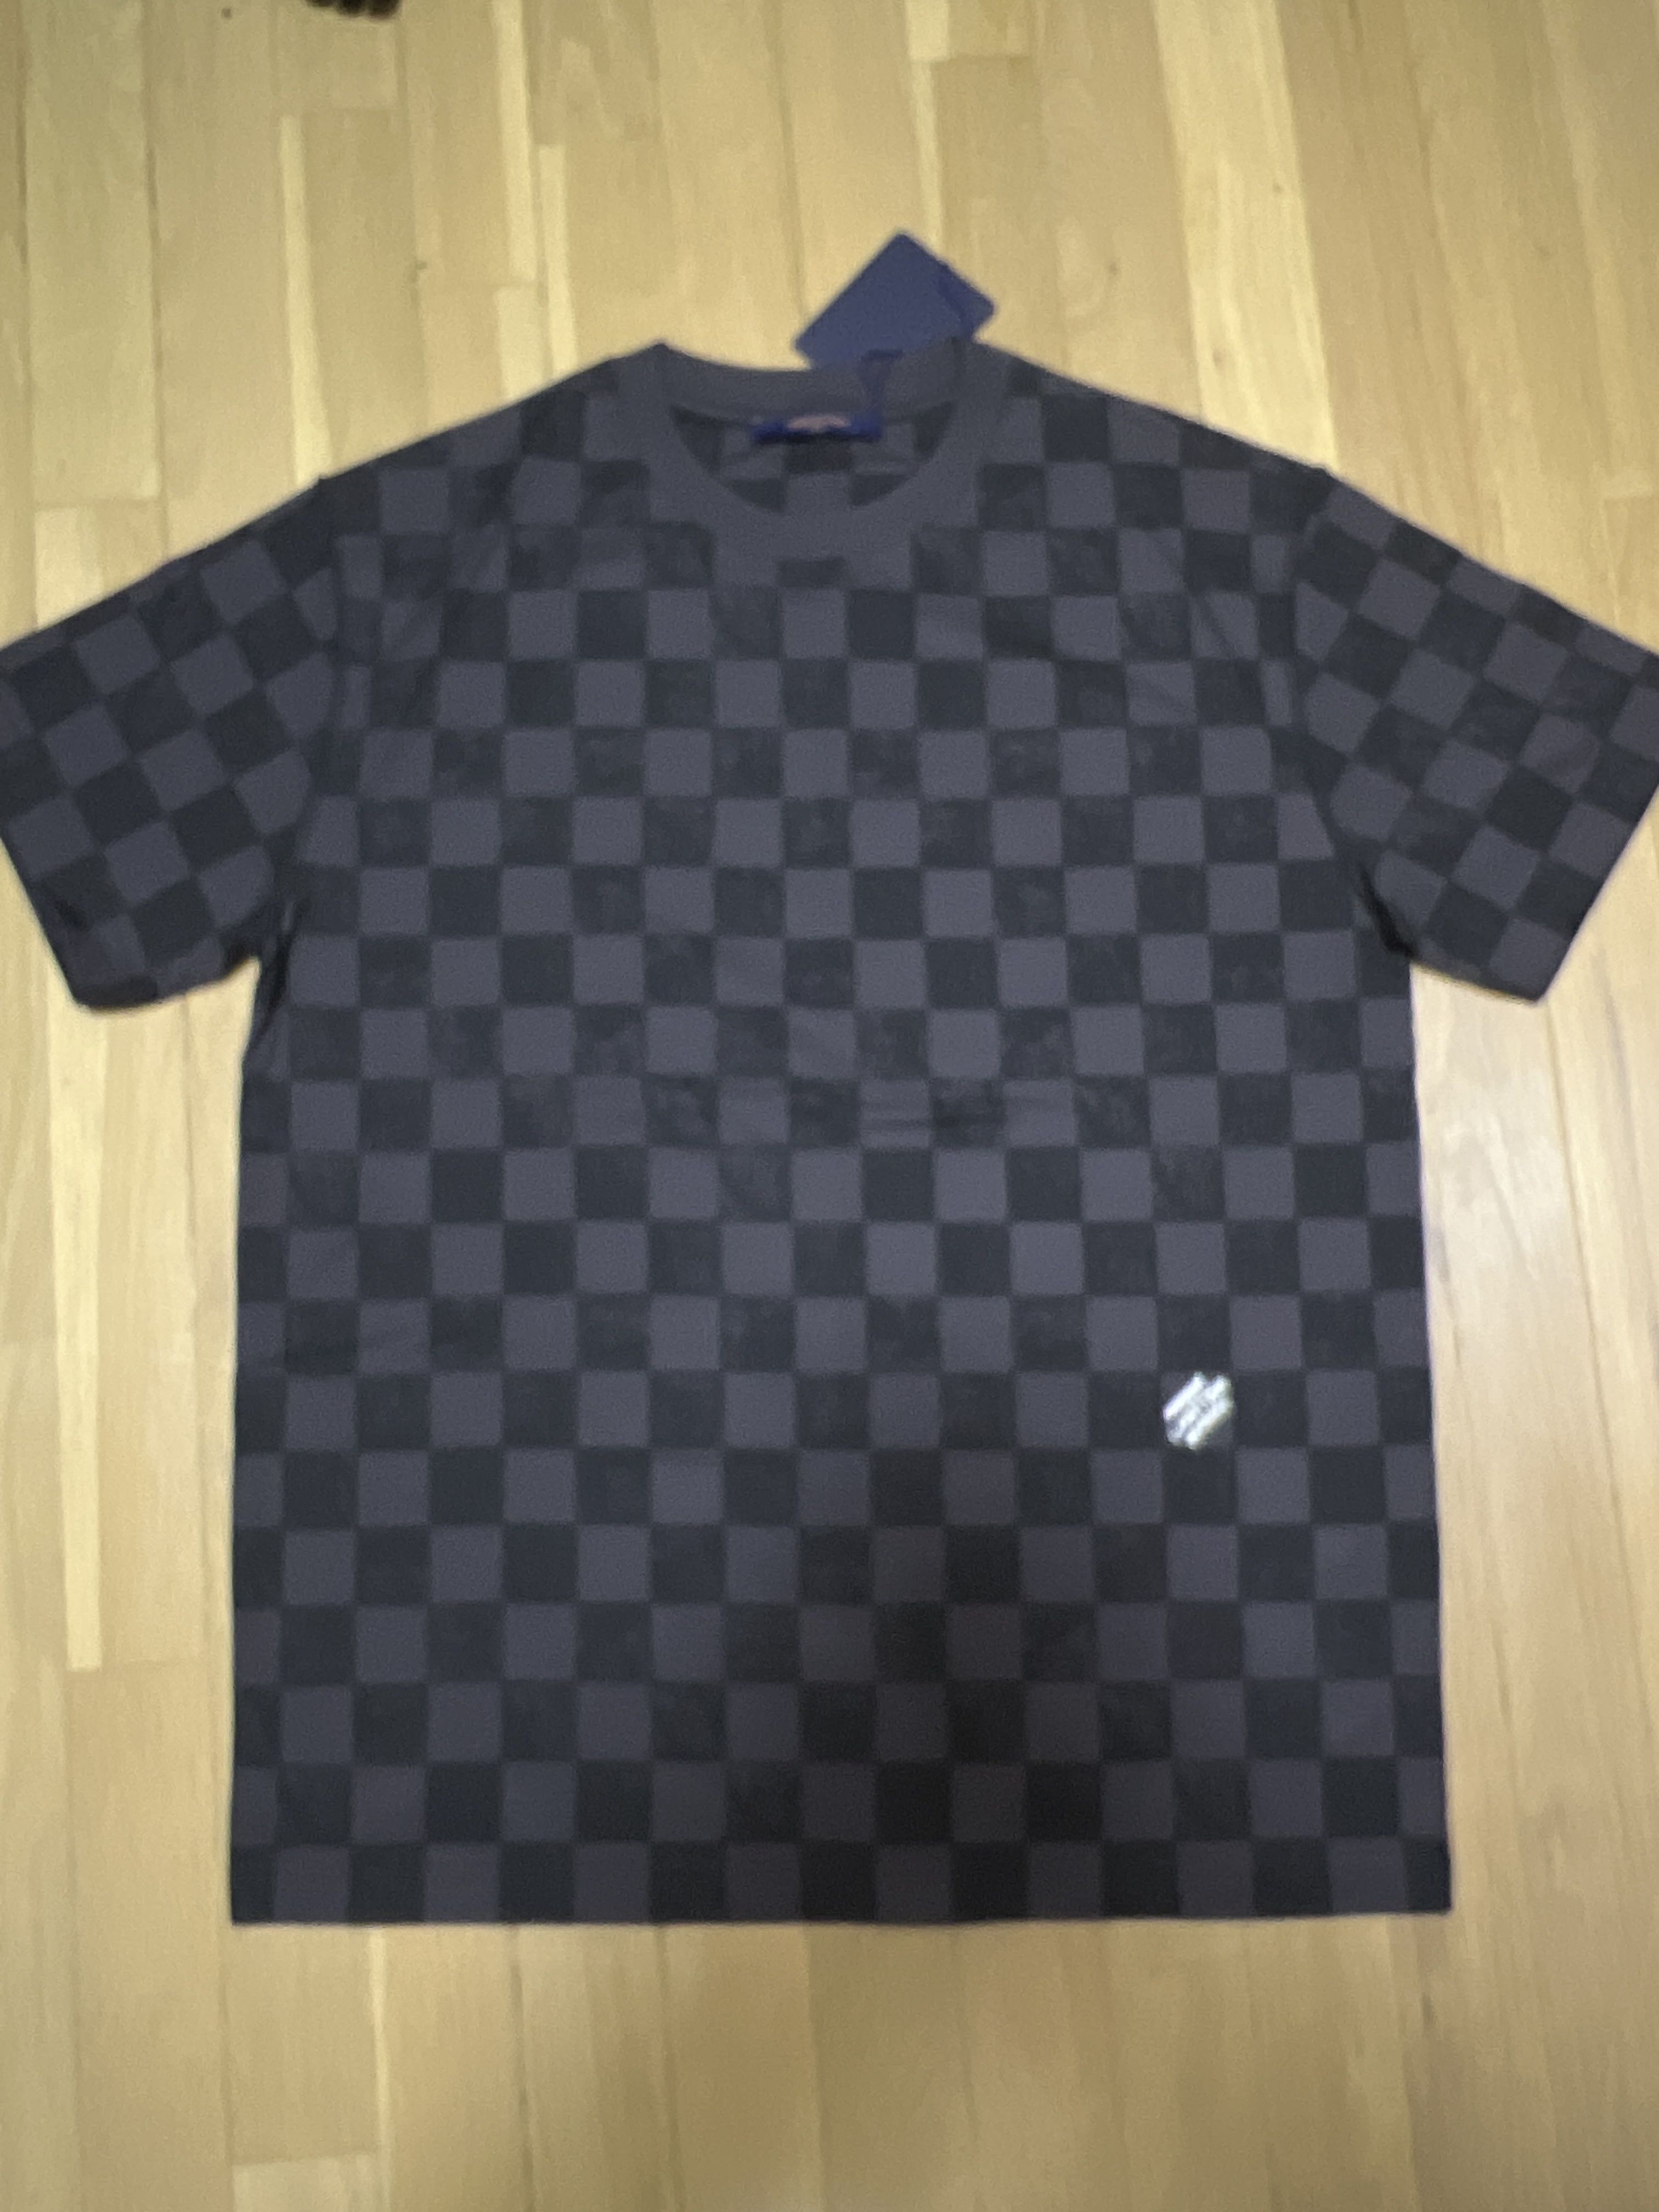 Louis Vuitton LV Damier Spread Long-Sleeved Shirt, Men's Fashion, Coats,  Jackets and Outerwear on Carousell